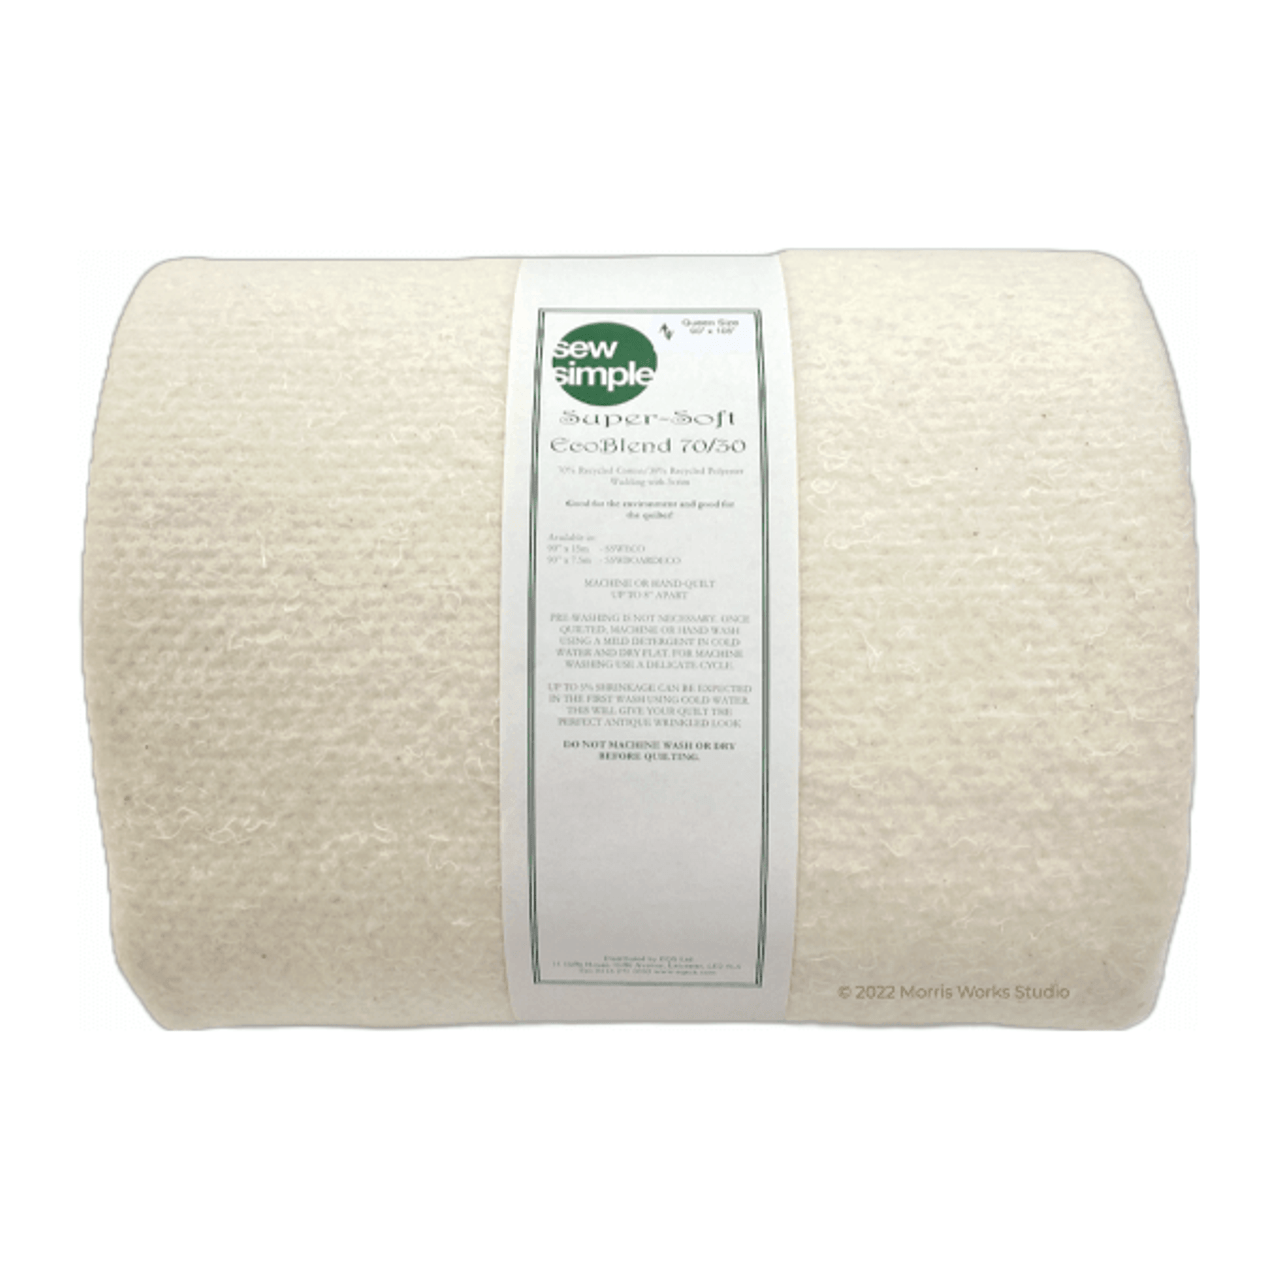 Sew Simple Super Soft 70/30 Eco Blend Cotton Wadding Pack Queen Size